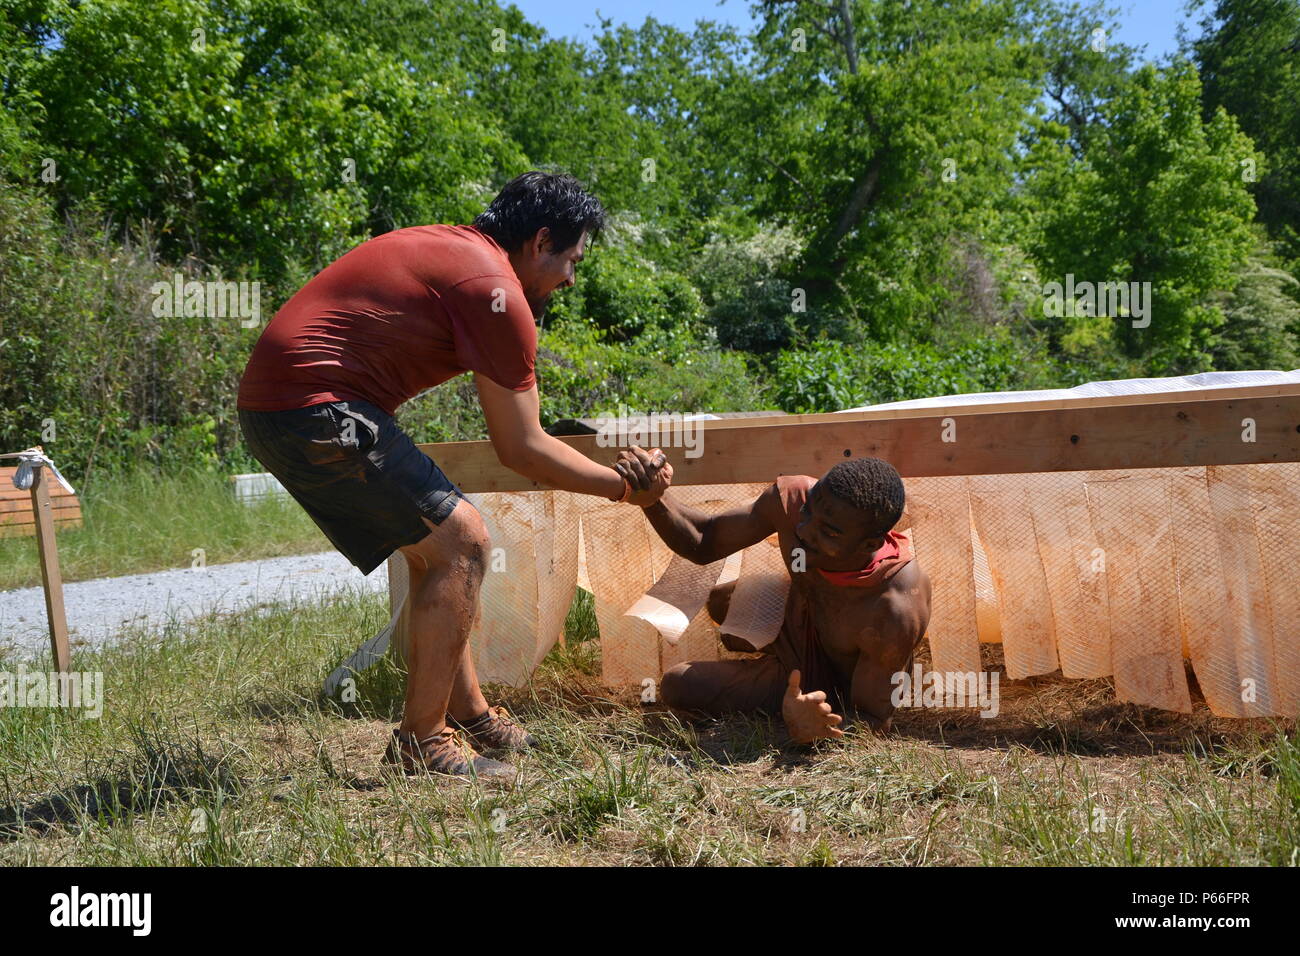 Alex Flores, of San Bernardino, Calif., pulls Chris Johnson, of Detroit, Mich., out of the 'Birth Canal' obstacle at the 2016 Atlanta Tough Mudder event. Partnered with the Army Marketing Research Group, the muddy event was held May 7 and 8, 2016, at Bouckaert Farms in Fairburn, Ga. Stock Photo